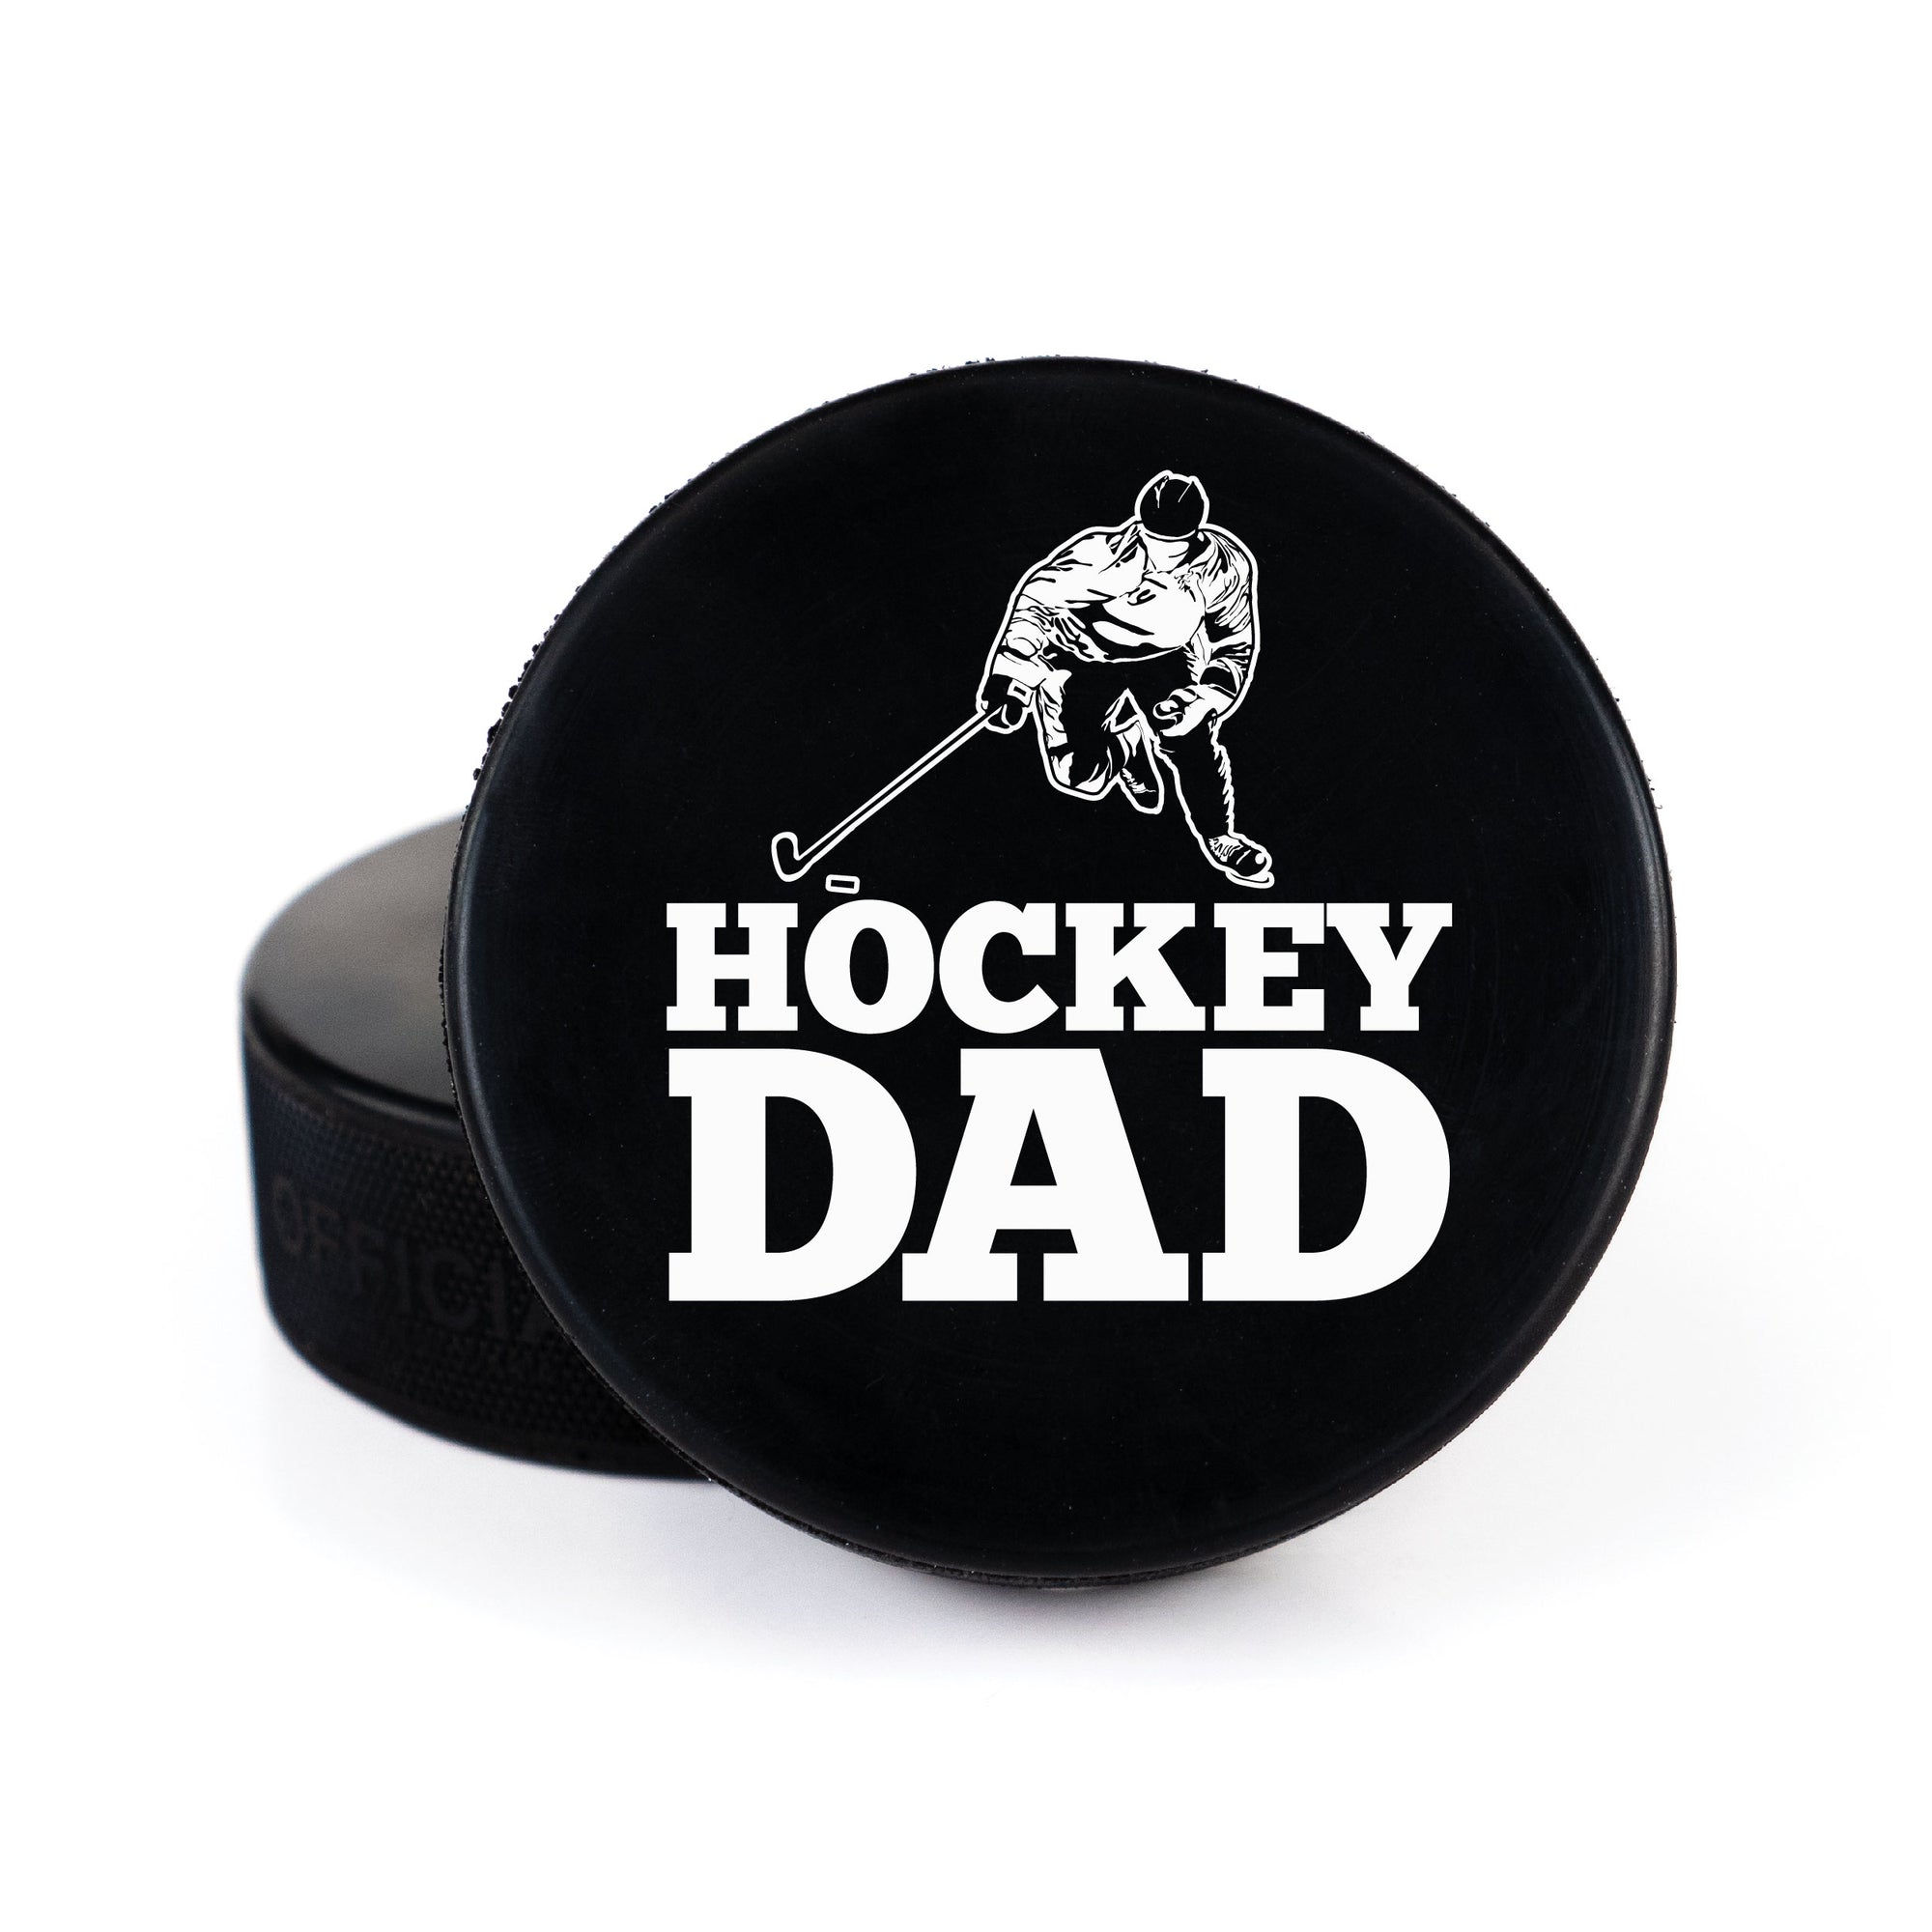 Printed Puck with Hockey Dad Design